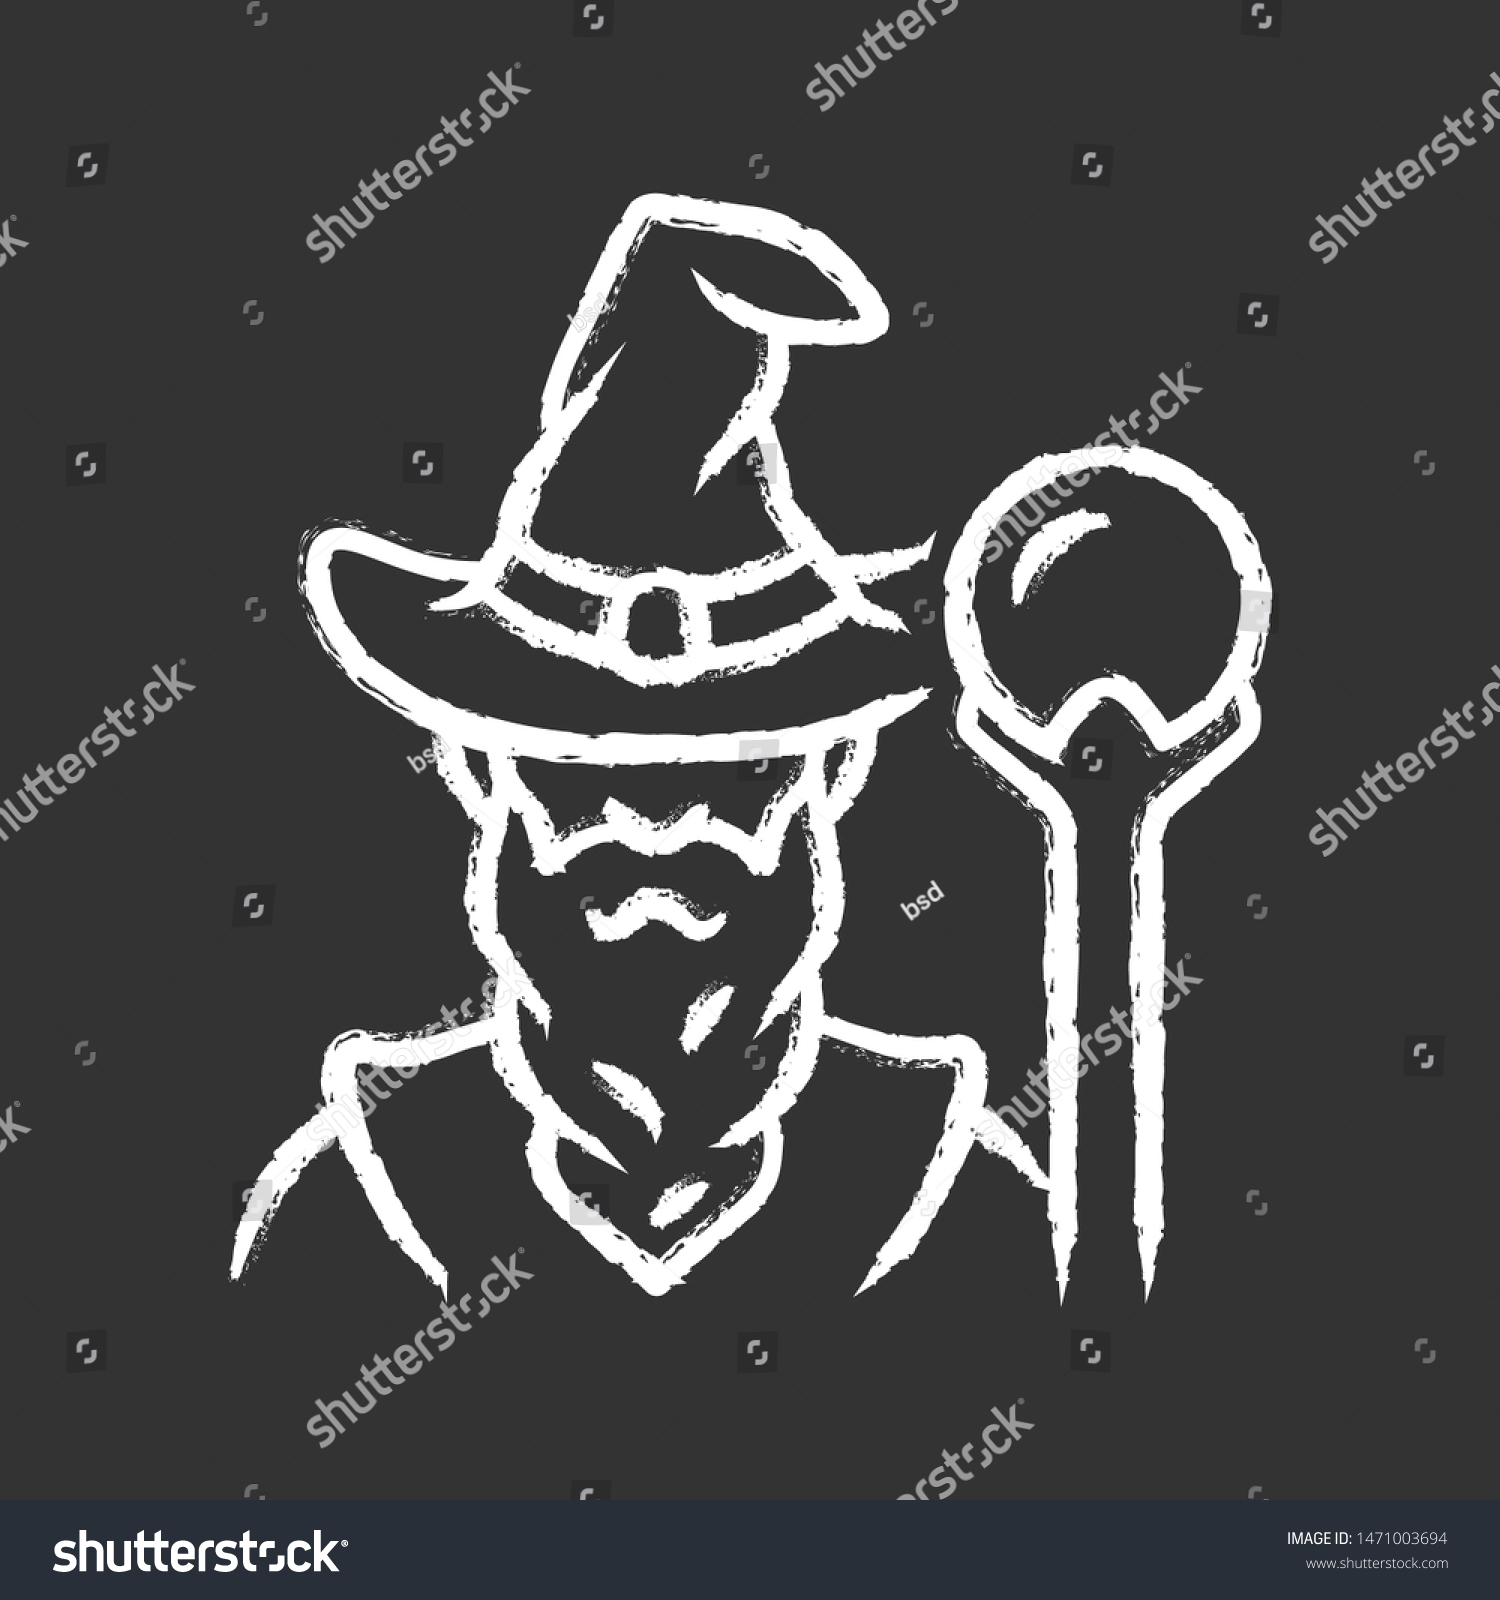 wizard chalk icon sorcerer magician hat stock vector royalty free 1471003694 shutterstock